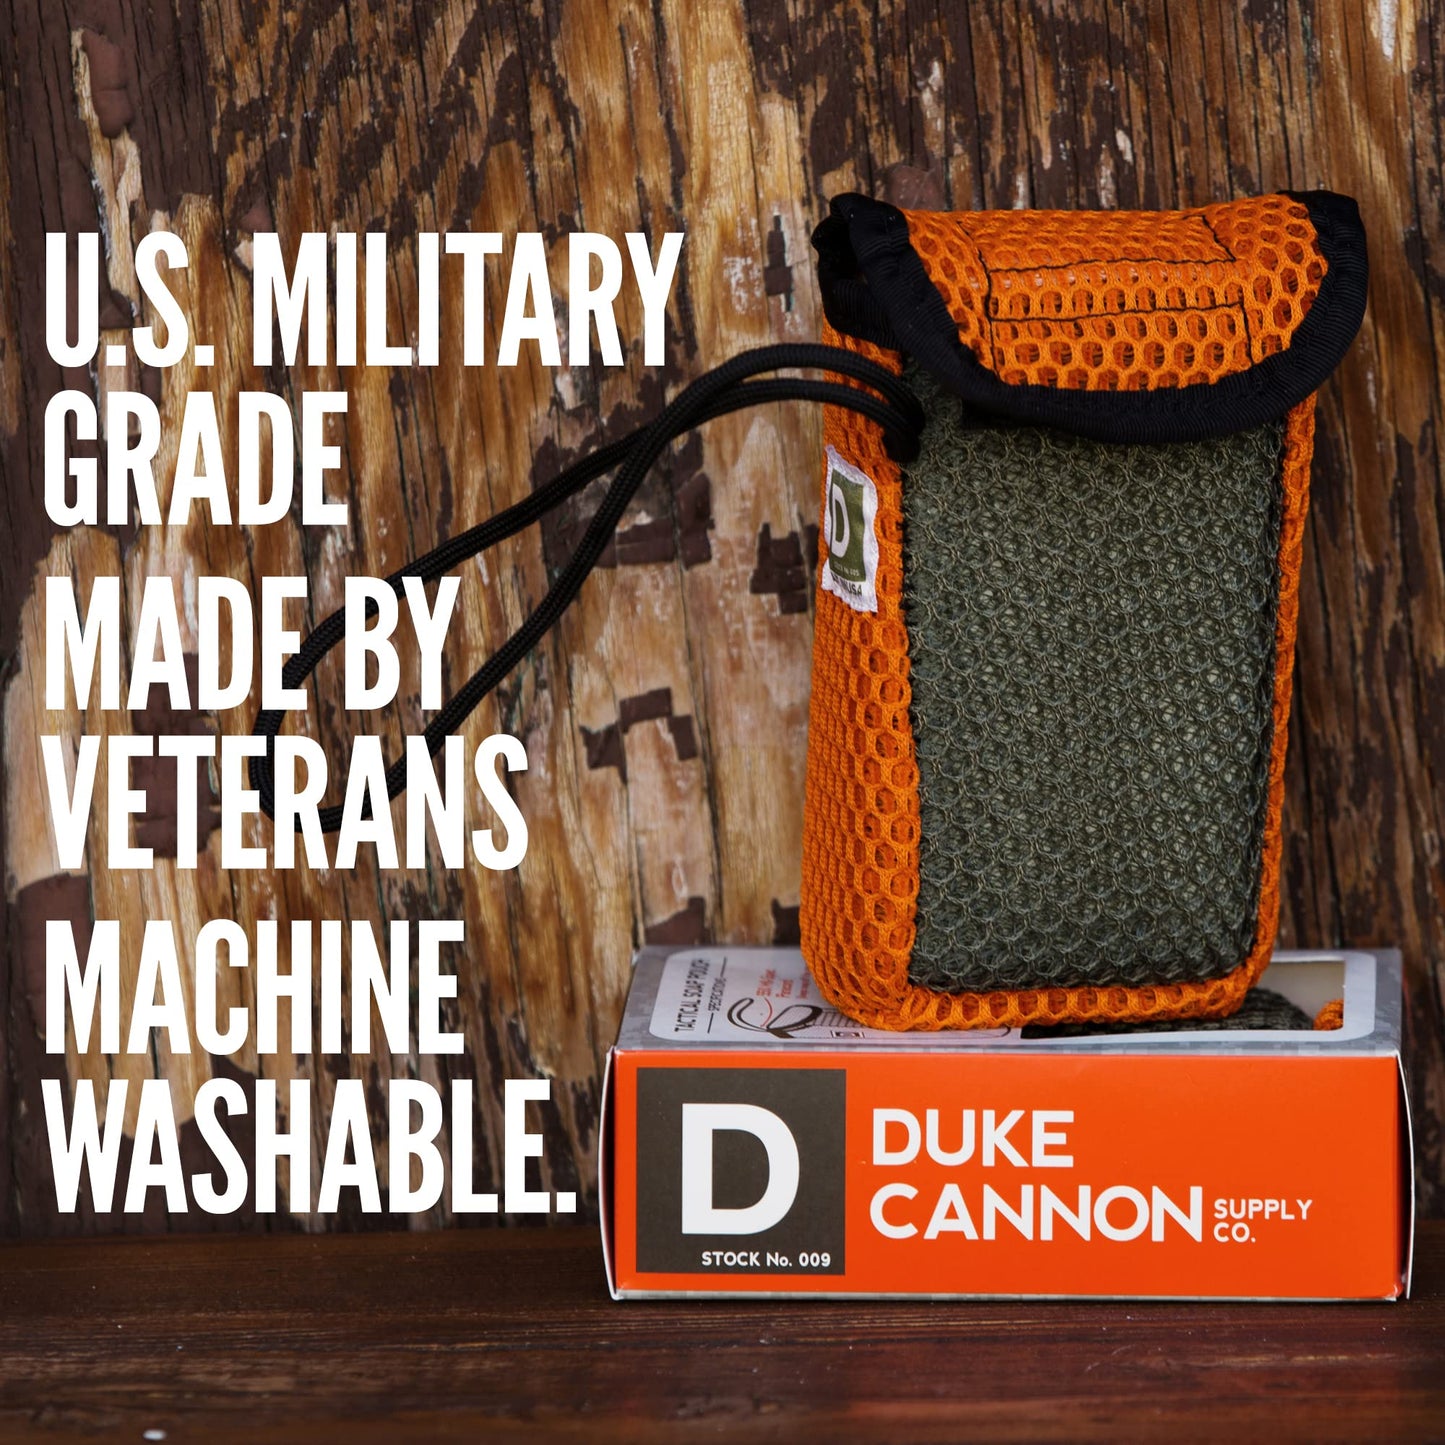 Duke Cannon Tactical Scrubber Soap Pouch - U.S. Military-Grade, Coarse and Soft Mesh, 550 Paracord, Shower Hygiene Essential for Men's Bar Soap